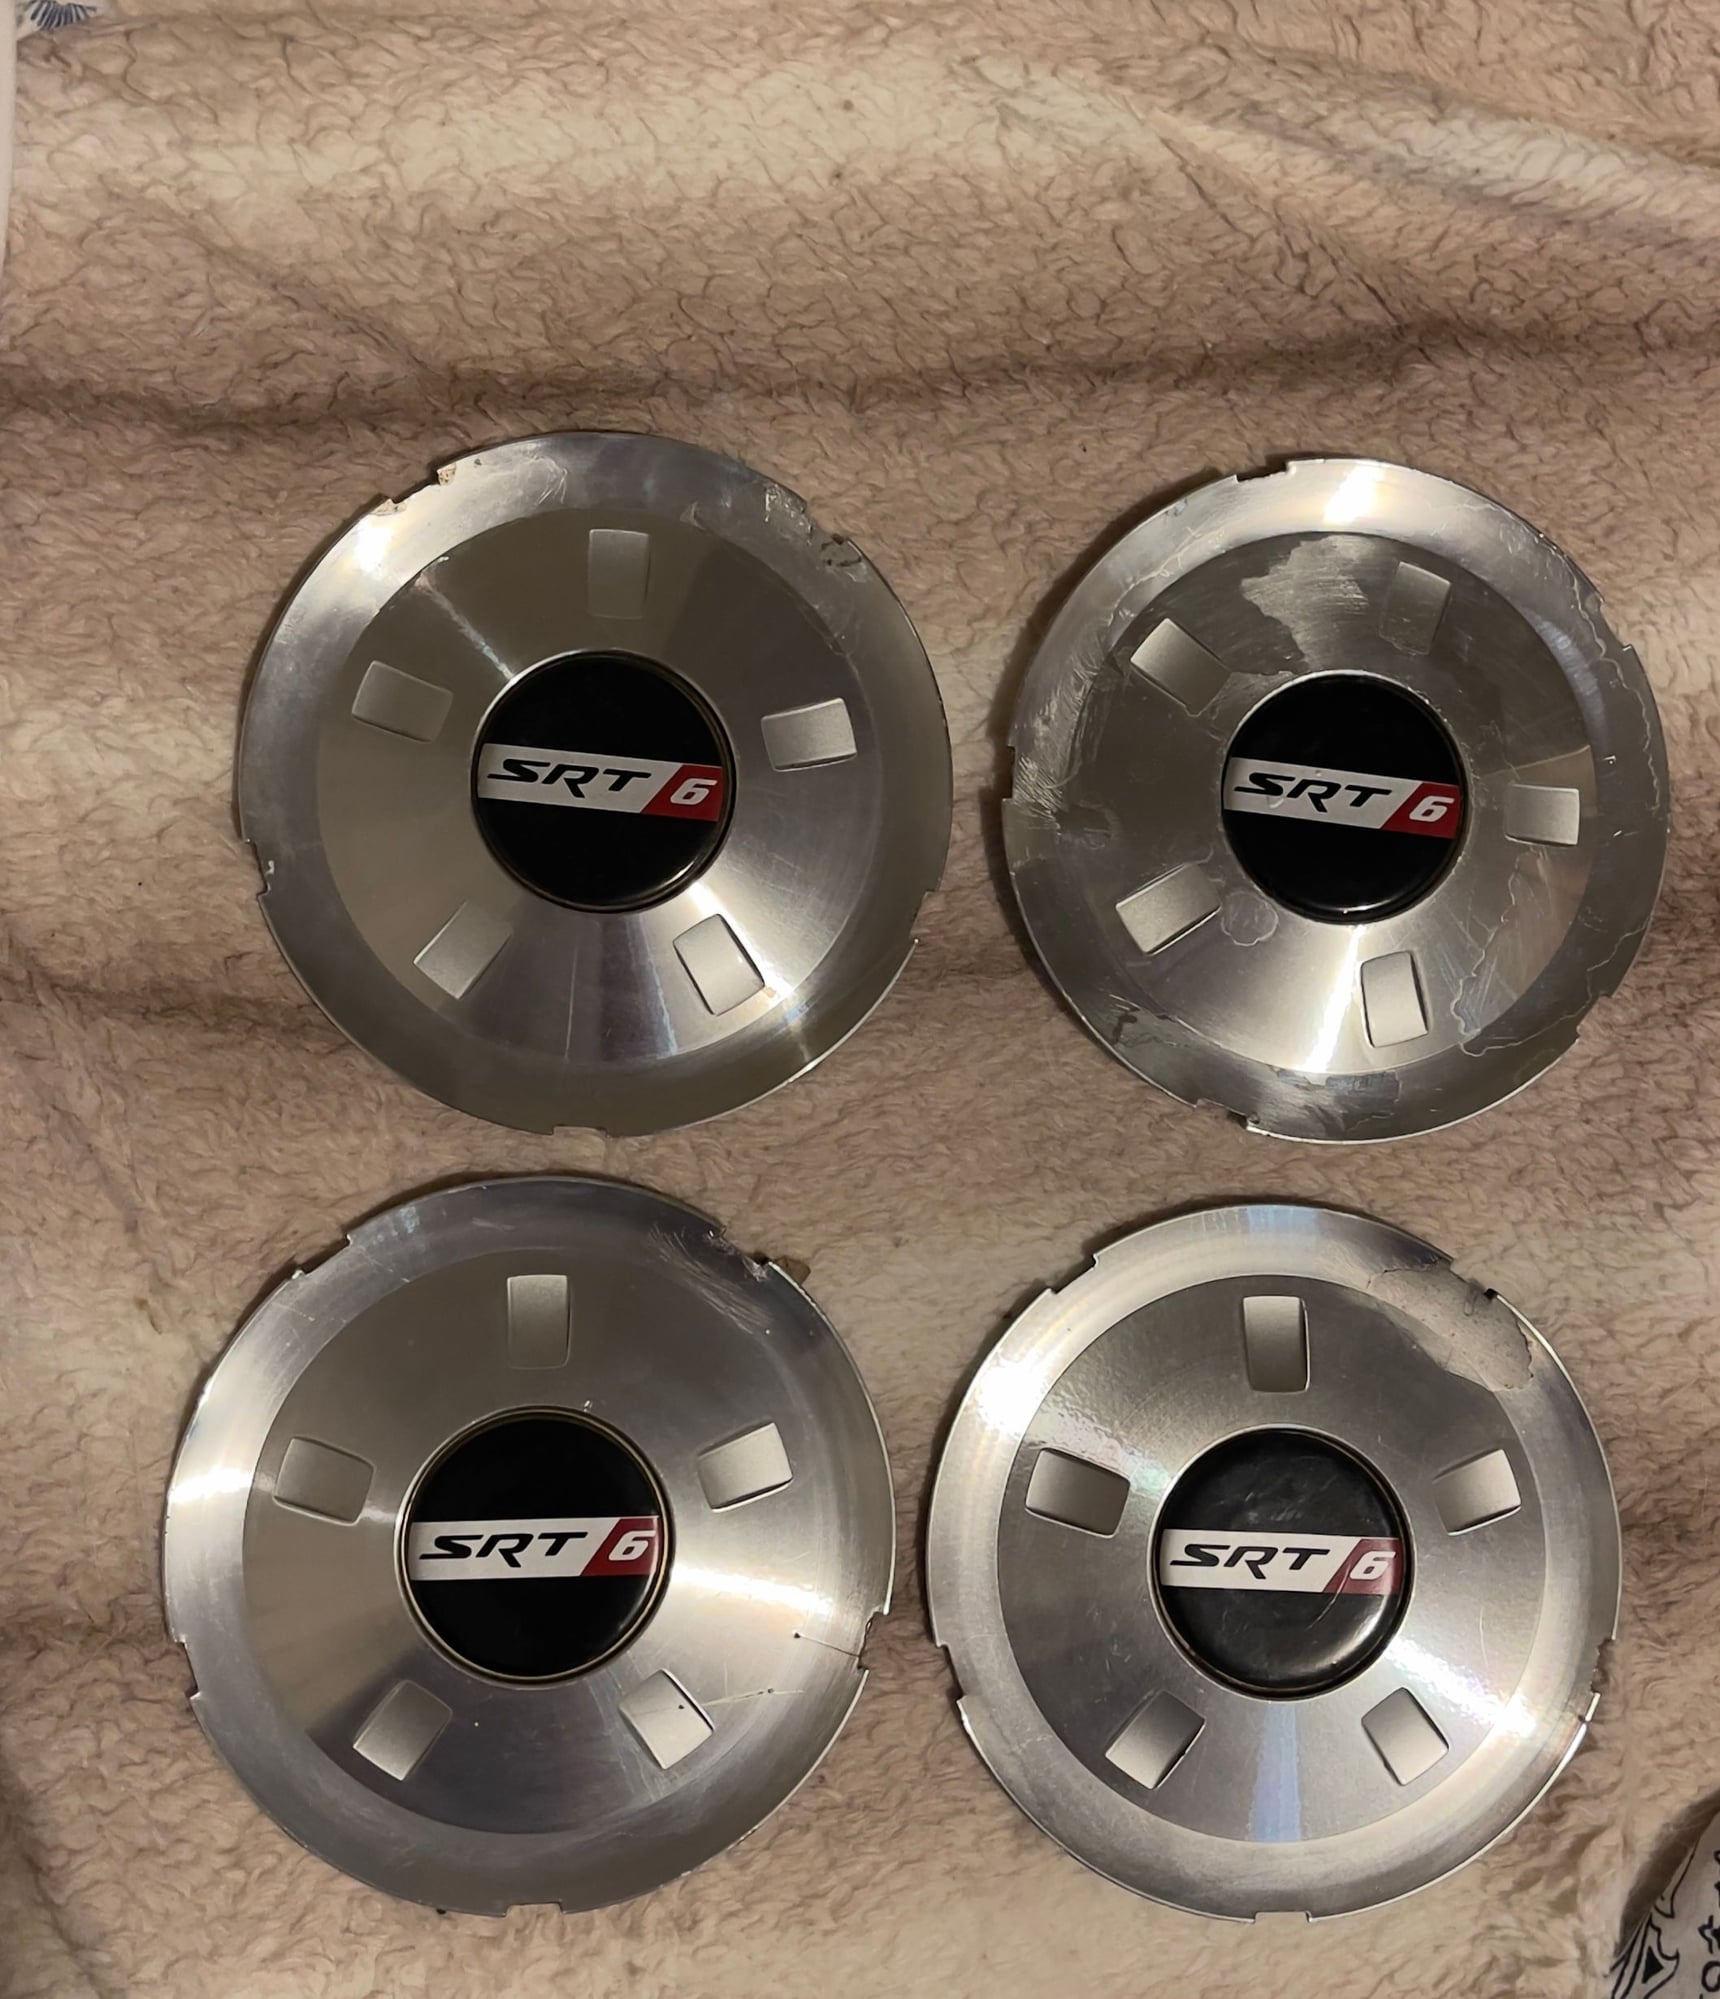 Wheels and Tires/Axles - Selling a set of SRT6 center caps - Used - 2005 to 2006 Chrysler Crossfire - The Village, OK 73120, United States